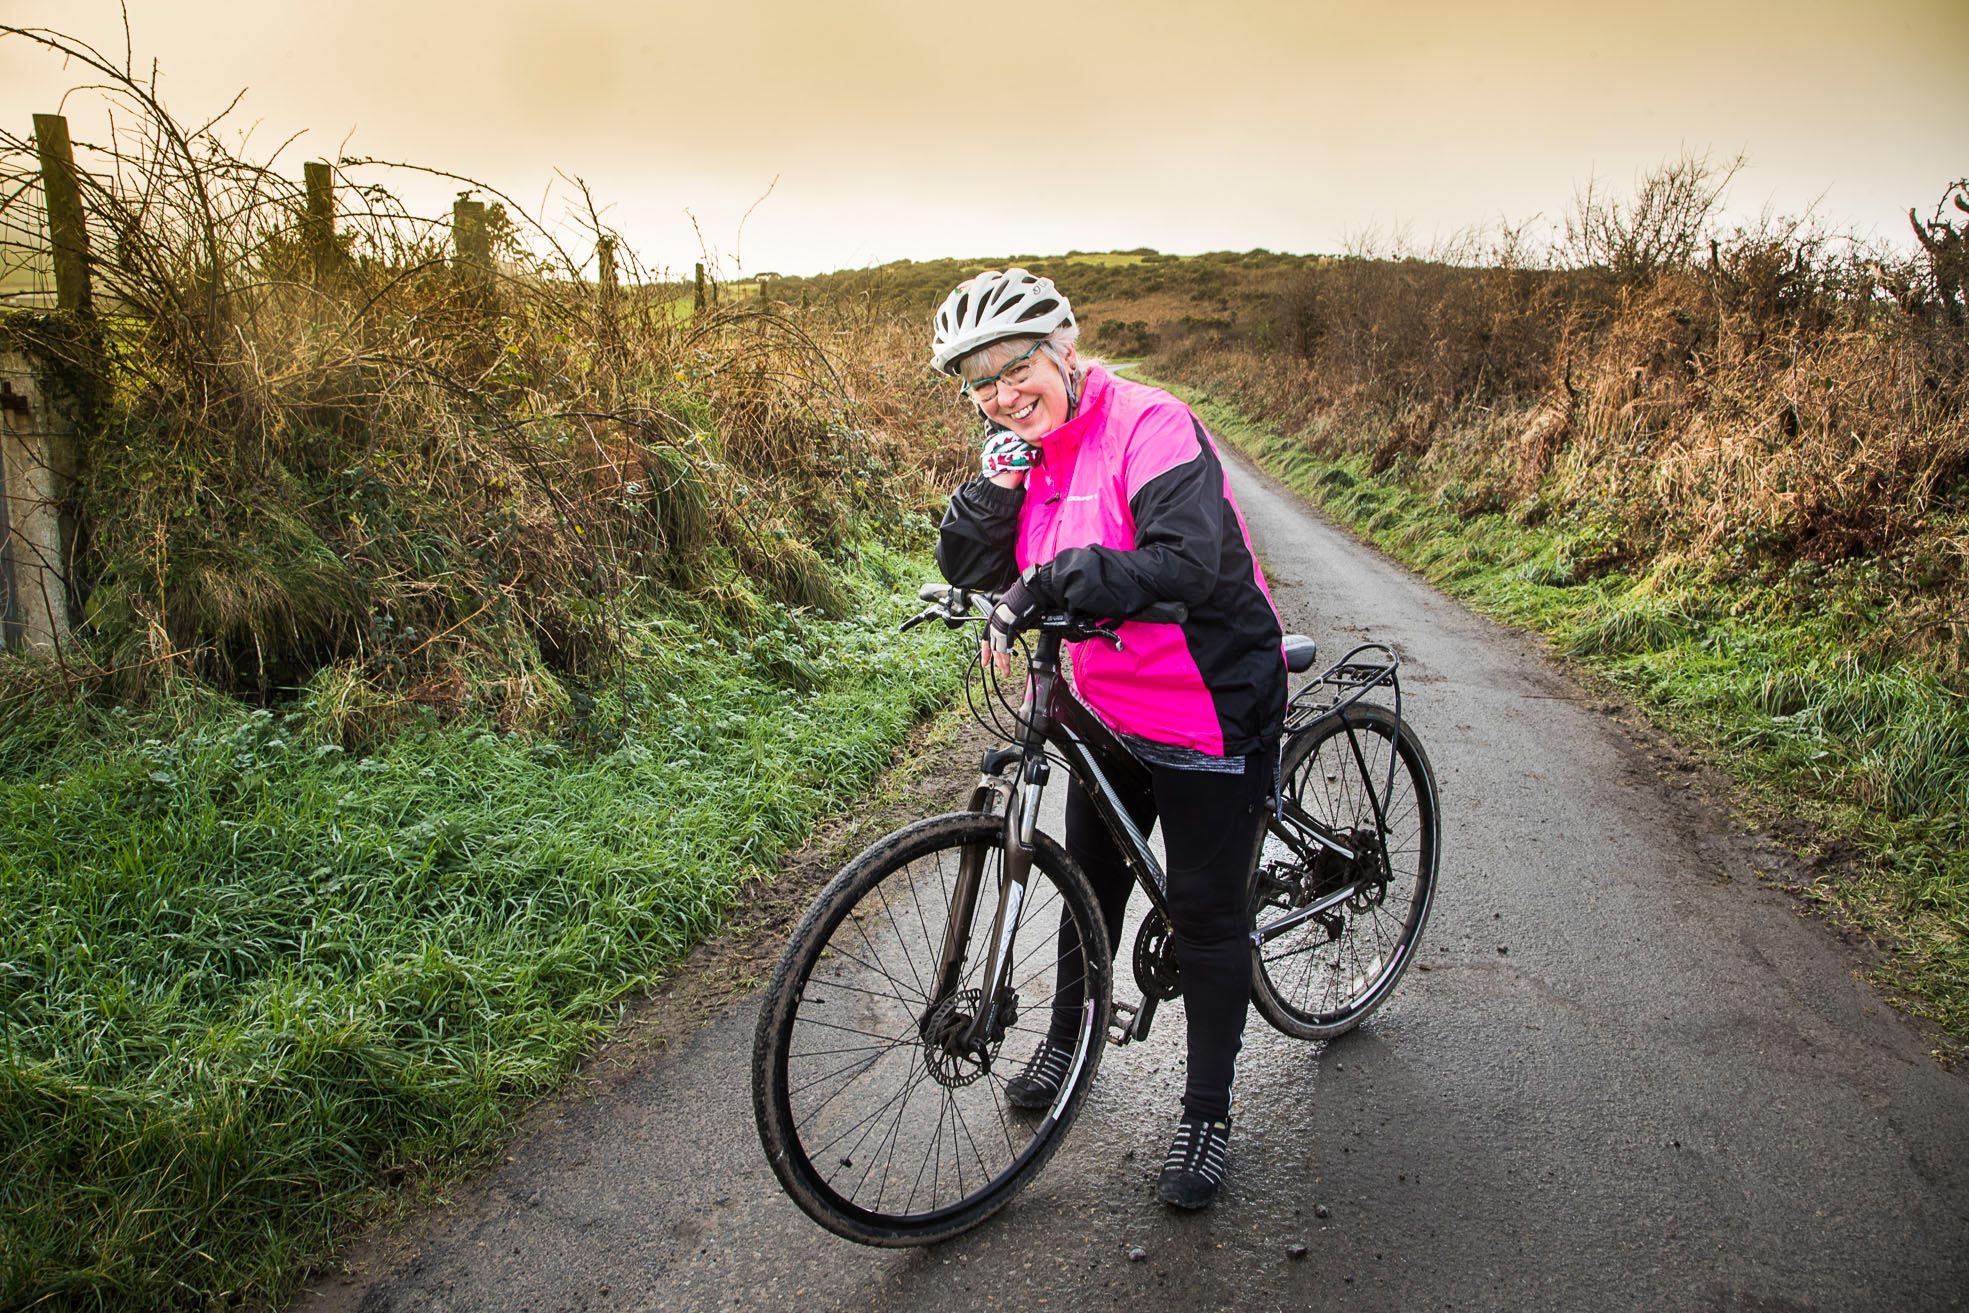 Plucky grandmother gets back on the saddle after hip replacement - and raises £20,000 for charity